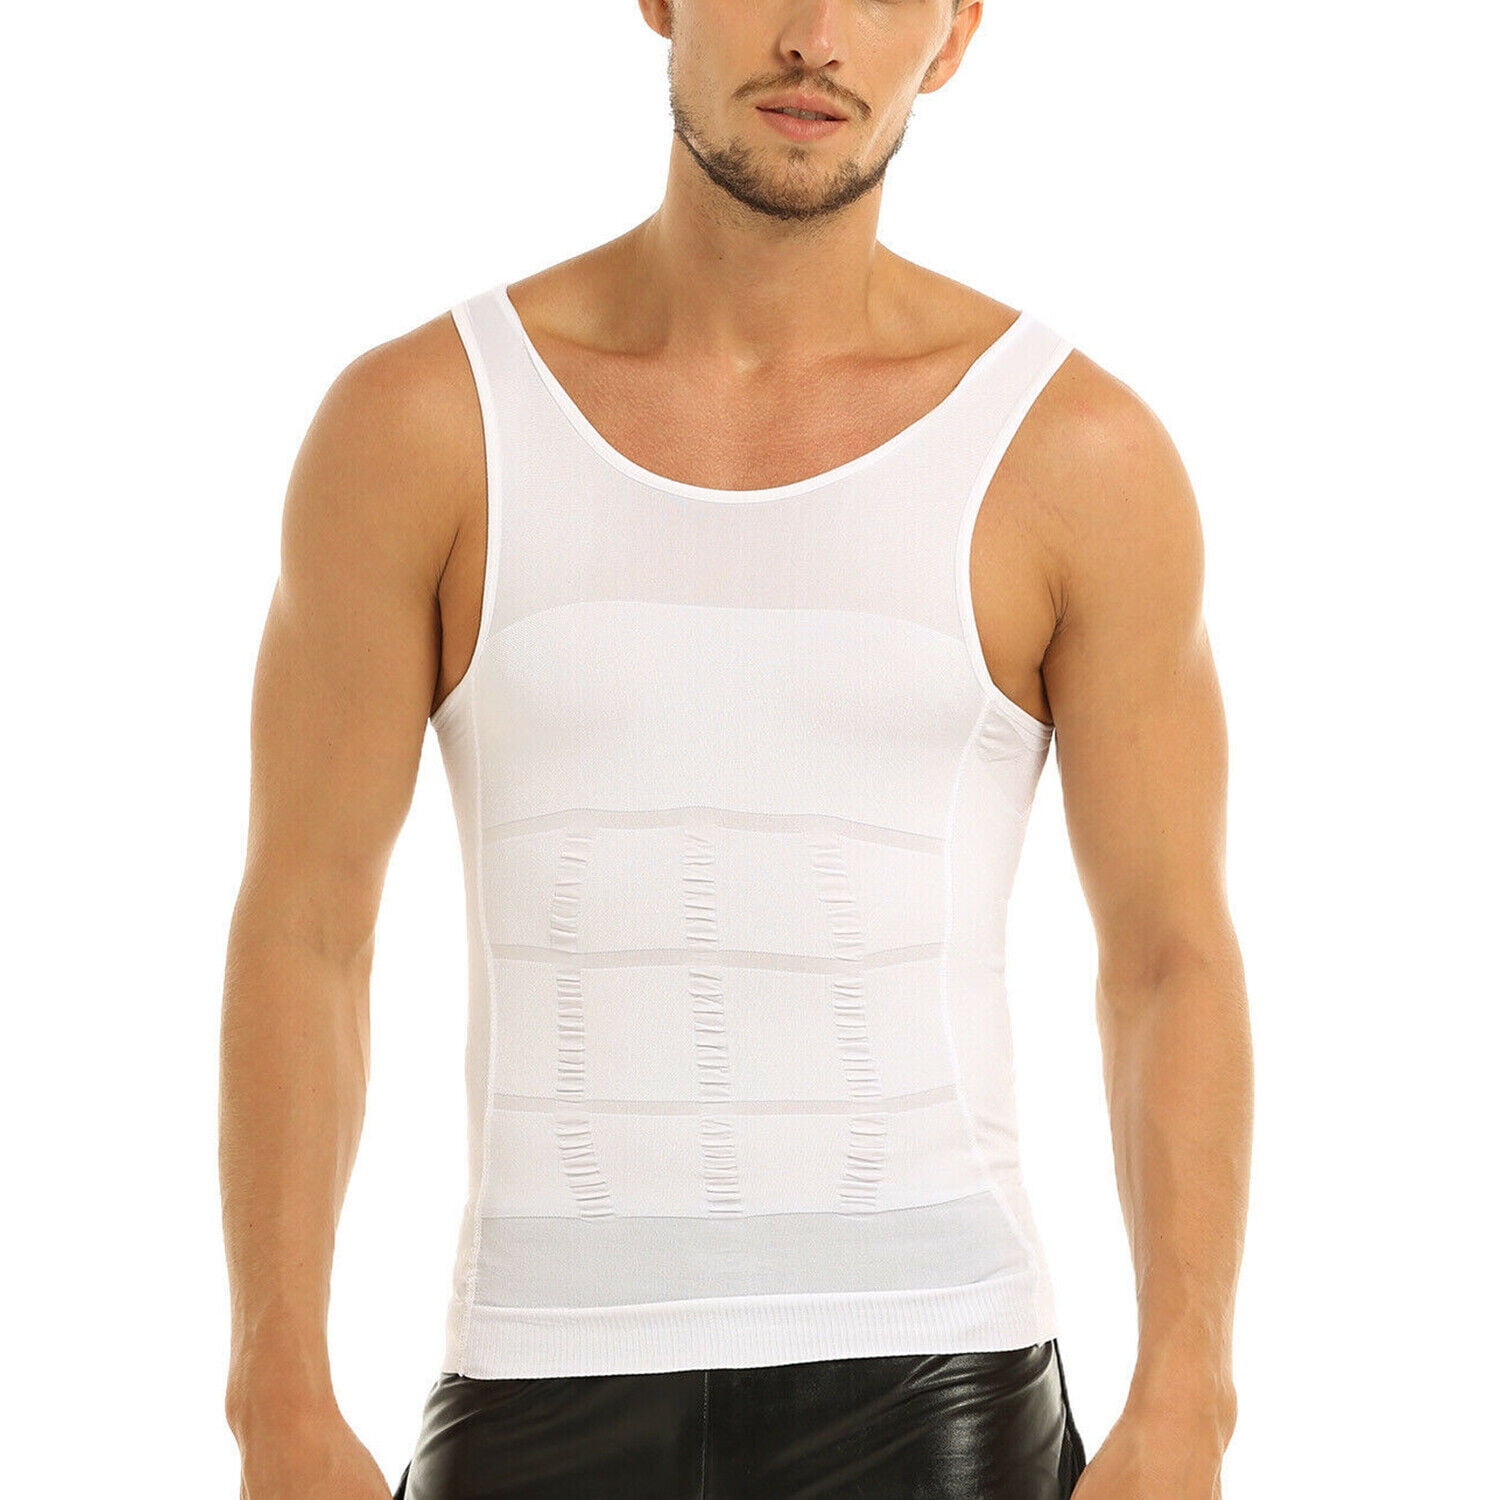 Body Shaper Belly Chest Compression Shirt Slimming Tank Top Abs Girdle Vest  Mens